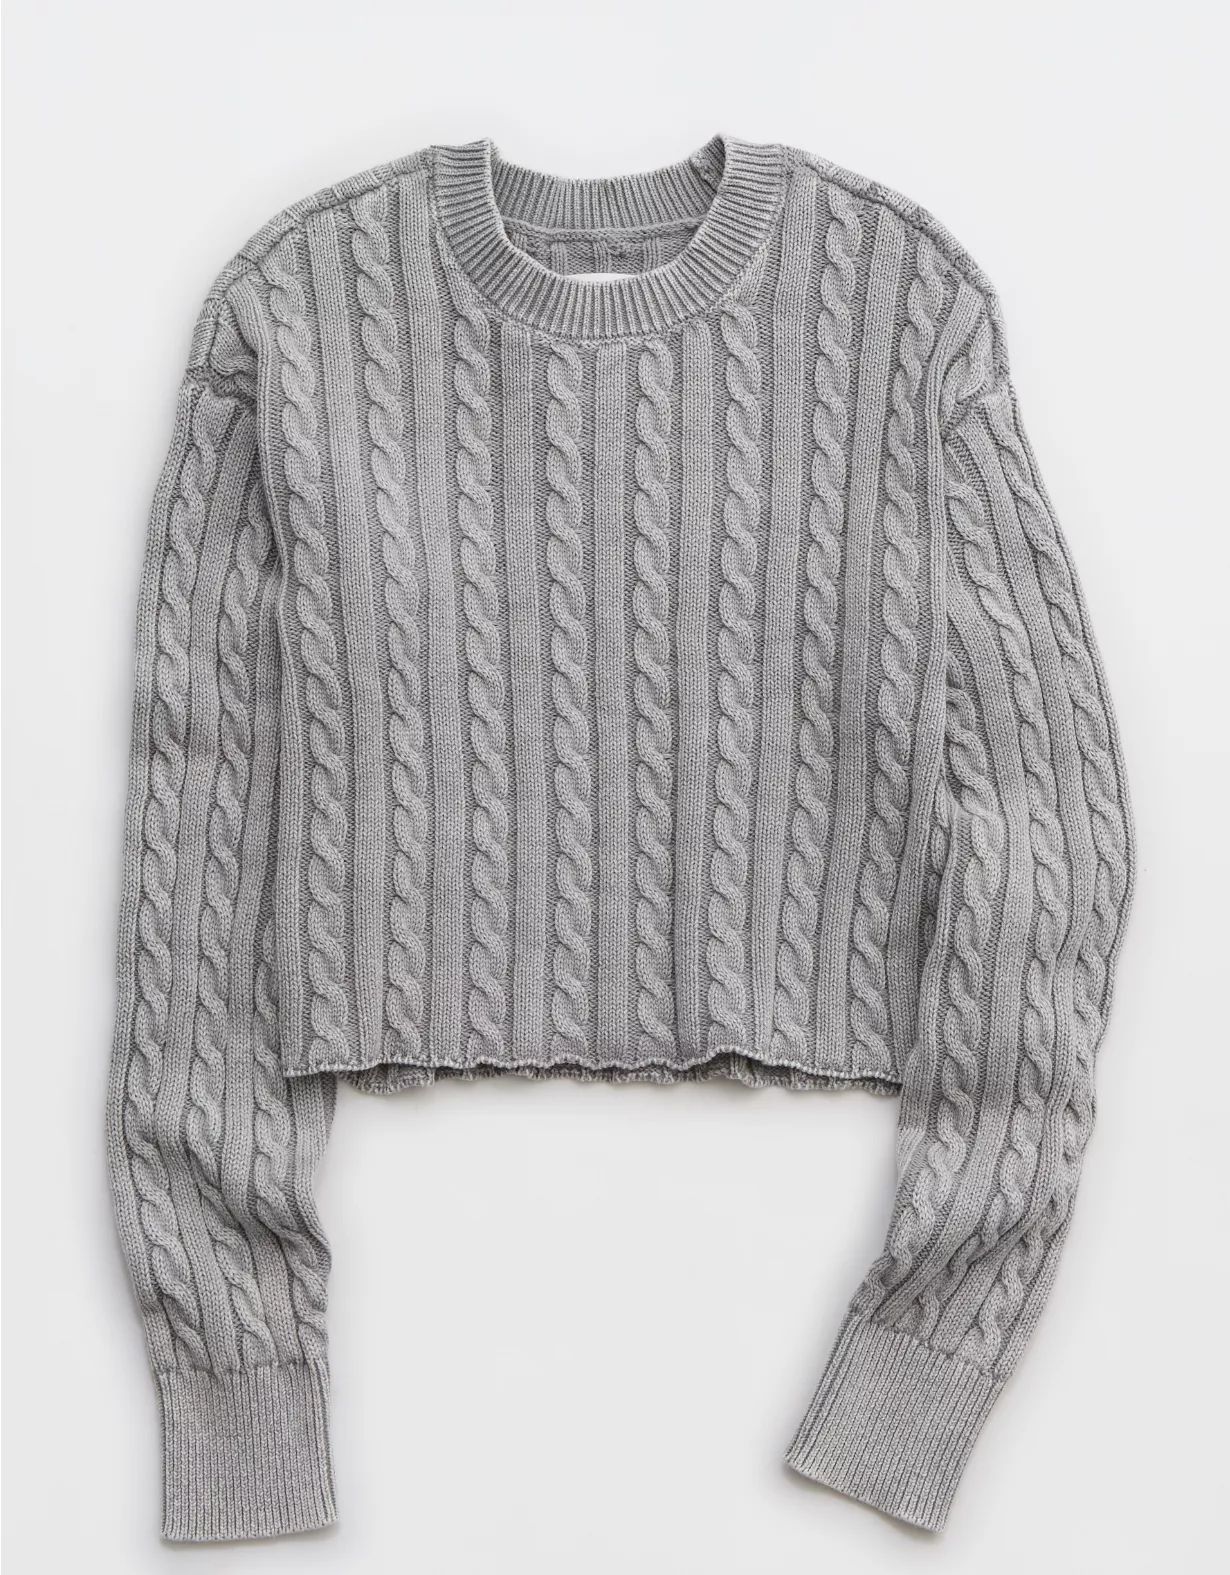 Aerie Mini Cable Cropped Sweater | Aerie